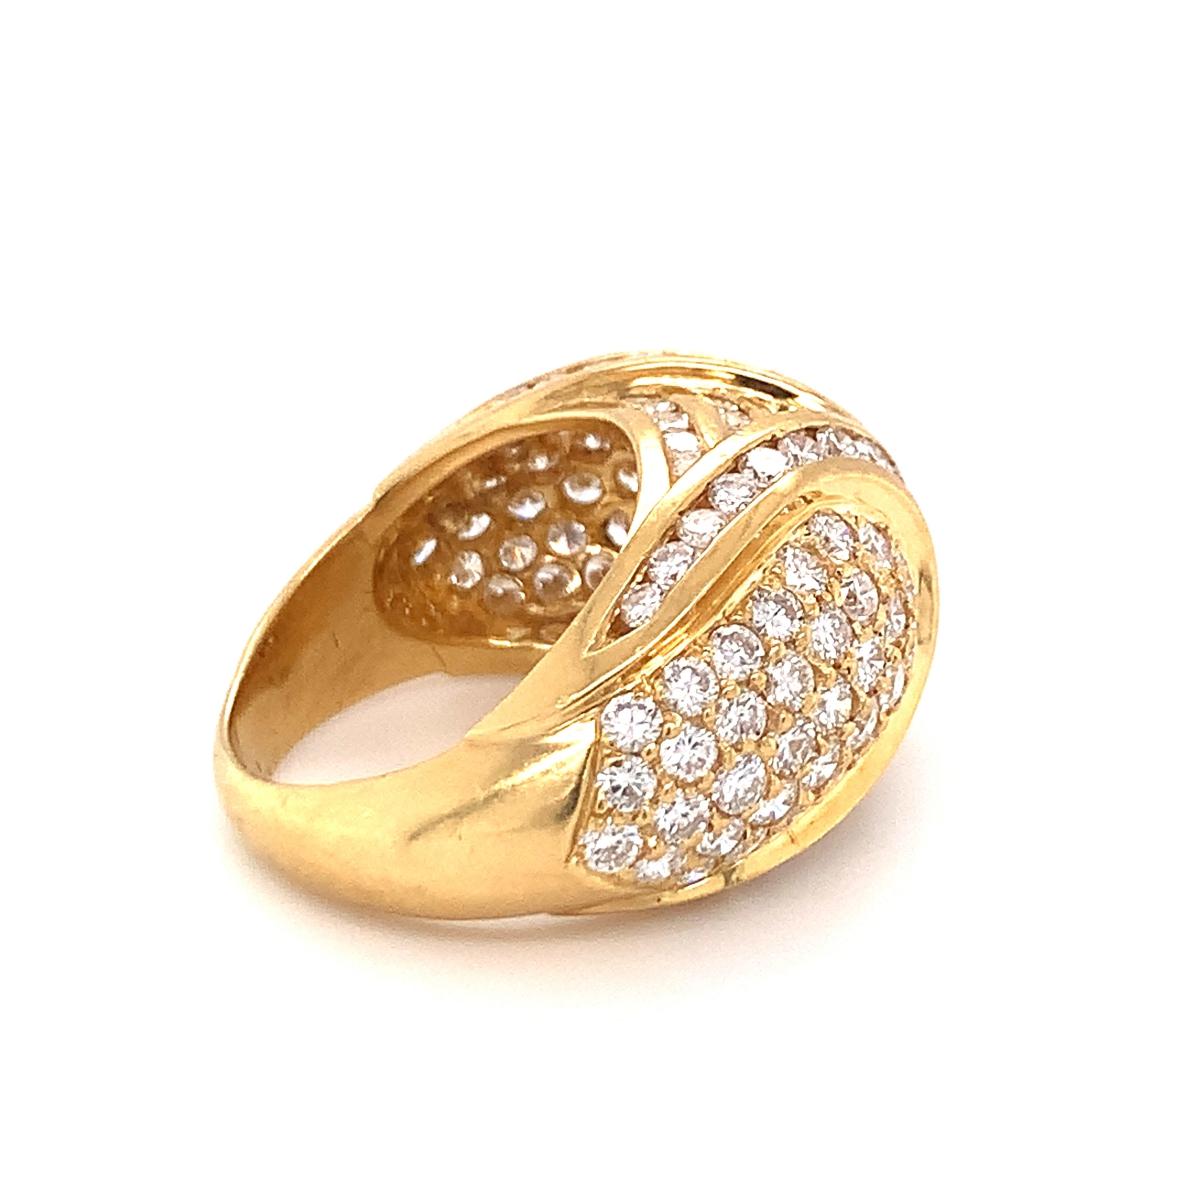 Pave Diamond Dome 18K Yellow Gold Ring, circa 1970s For Sale 1